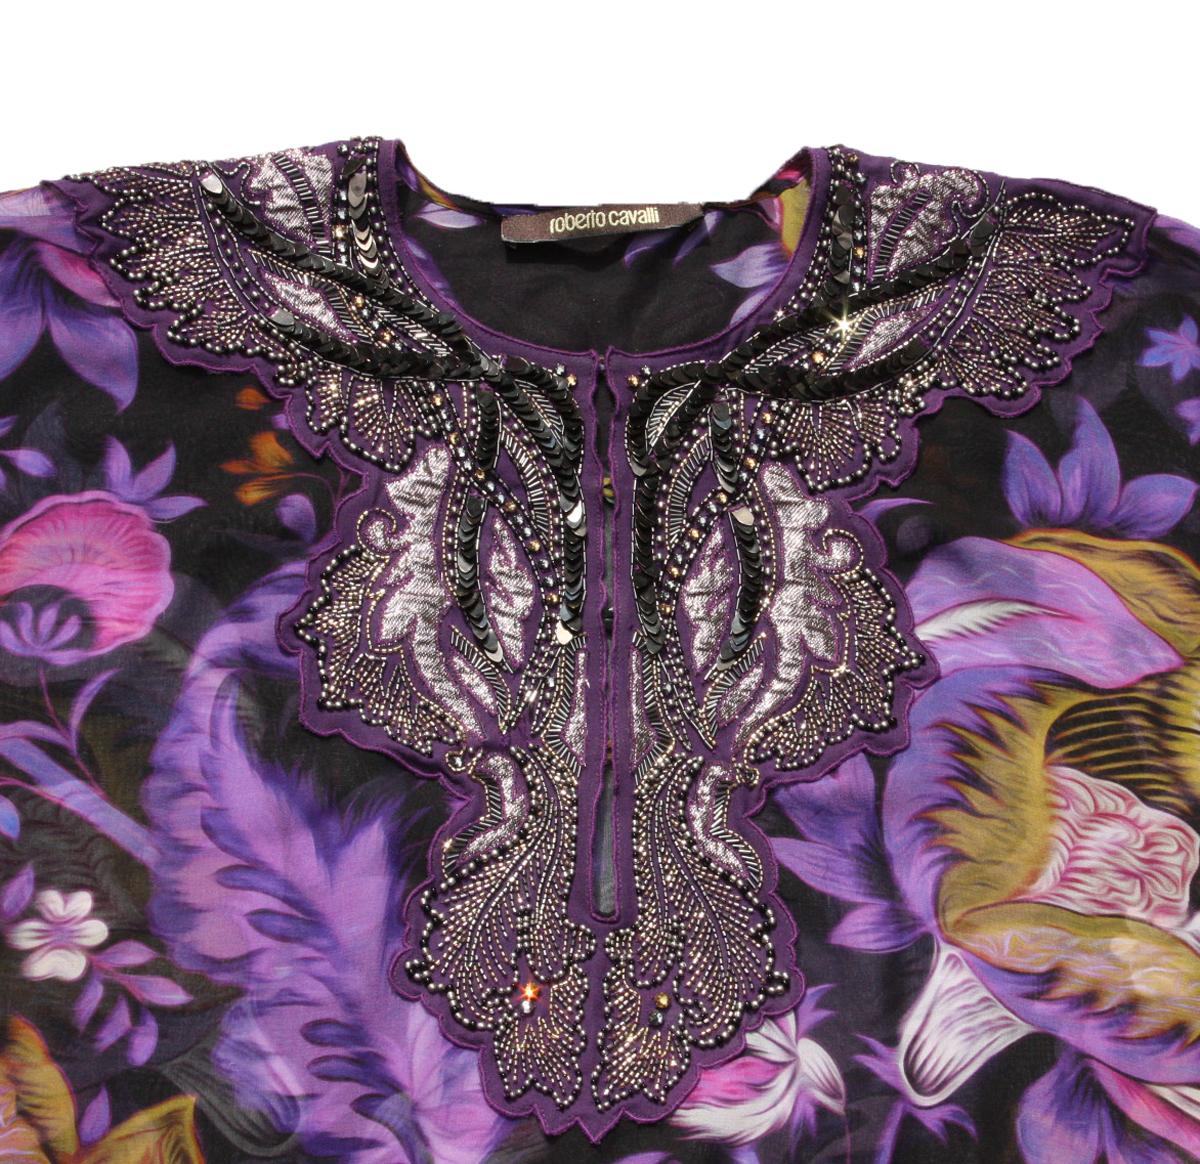 New ROBERTO CAVALLI Silk Beads Sequin Embellished Kimono Caftan Dress It. 46 In New Condition For Sale In Montgomery, TX